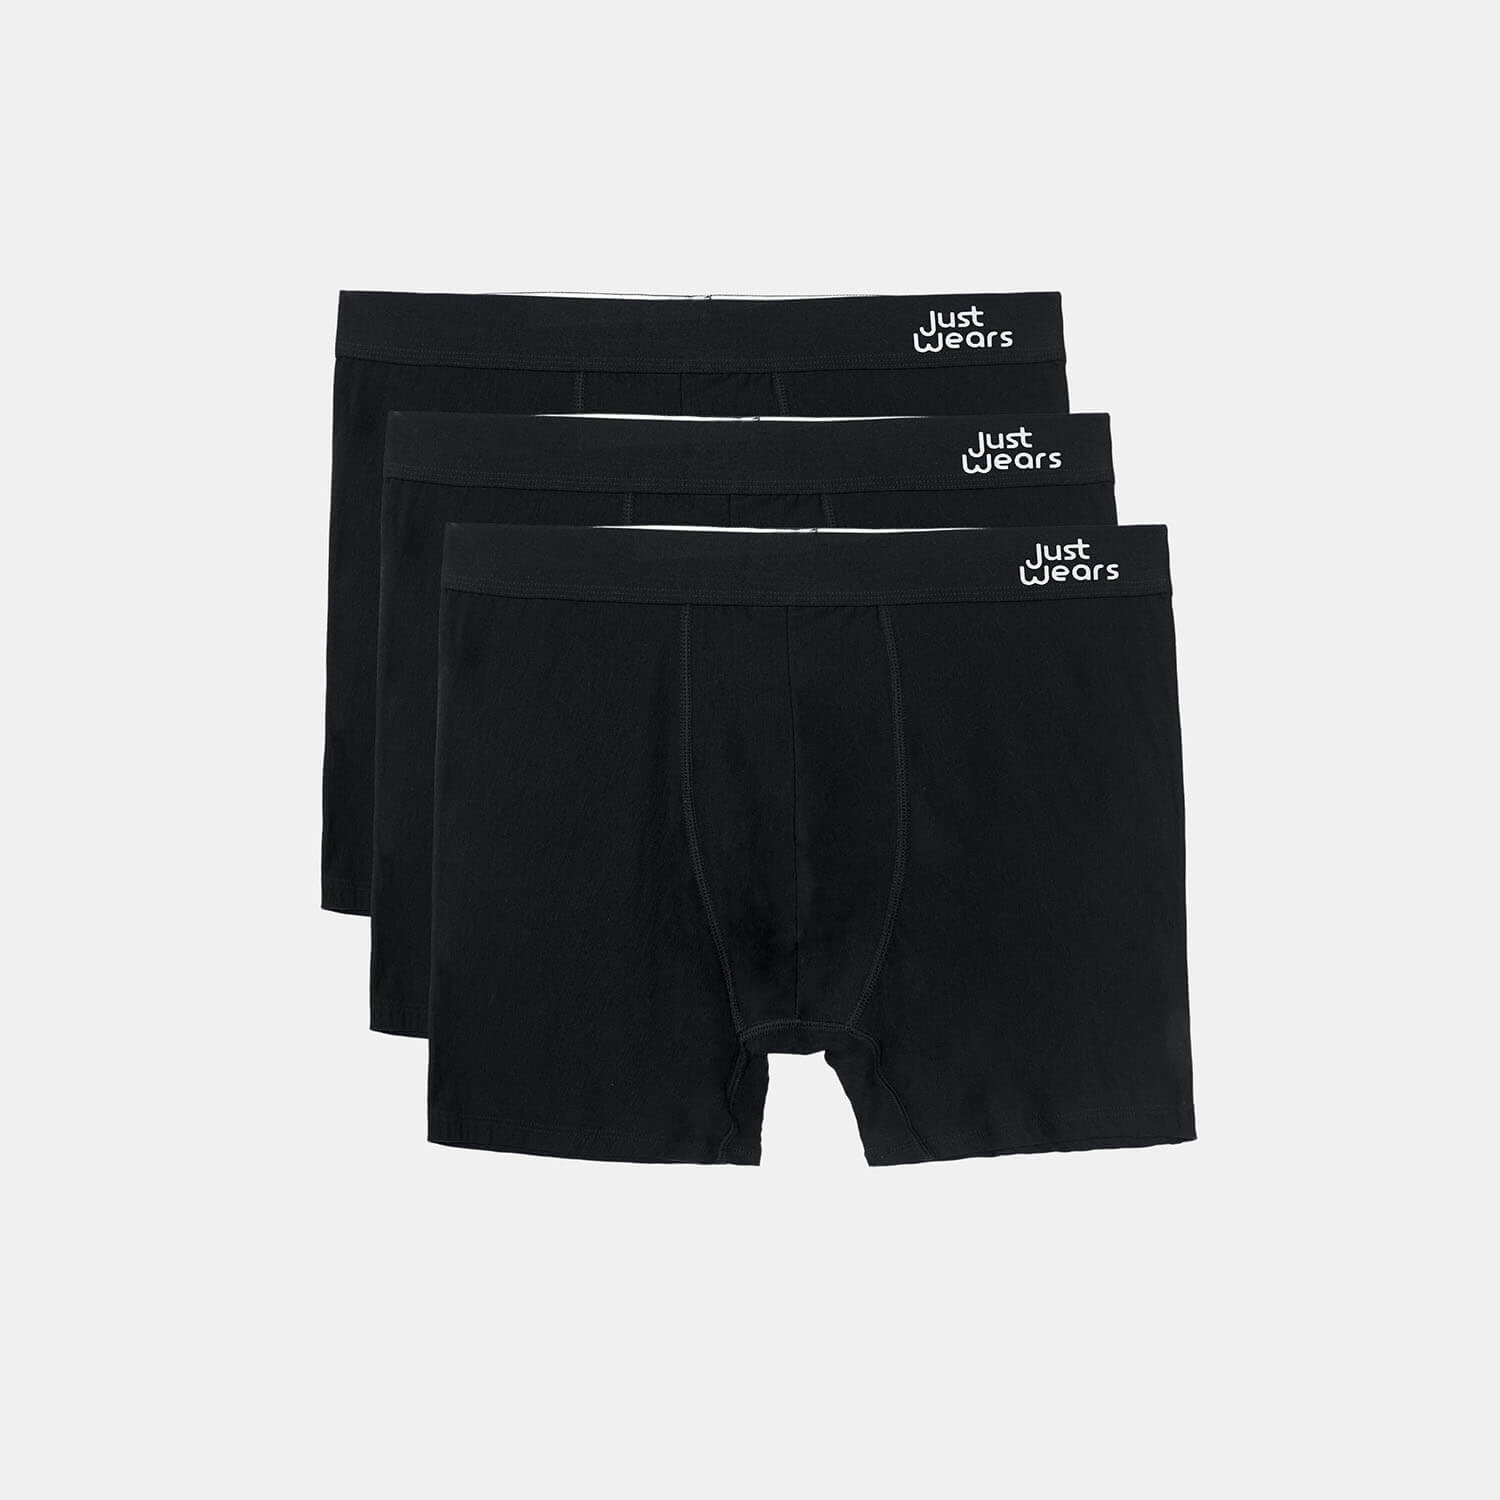 Men's Boxer Briefs With A Pouch  Anti-Chafing Boxers, 5x Softer